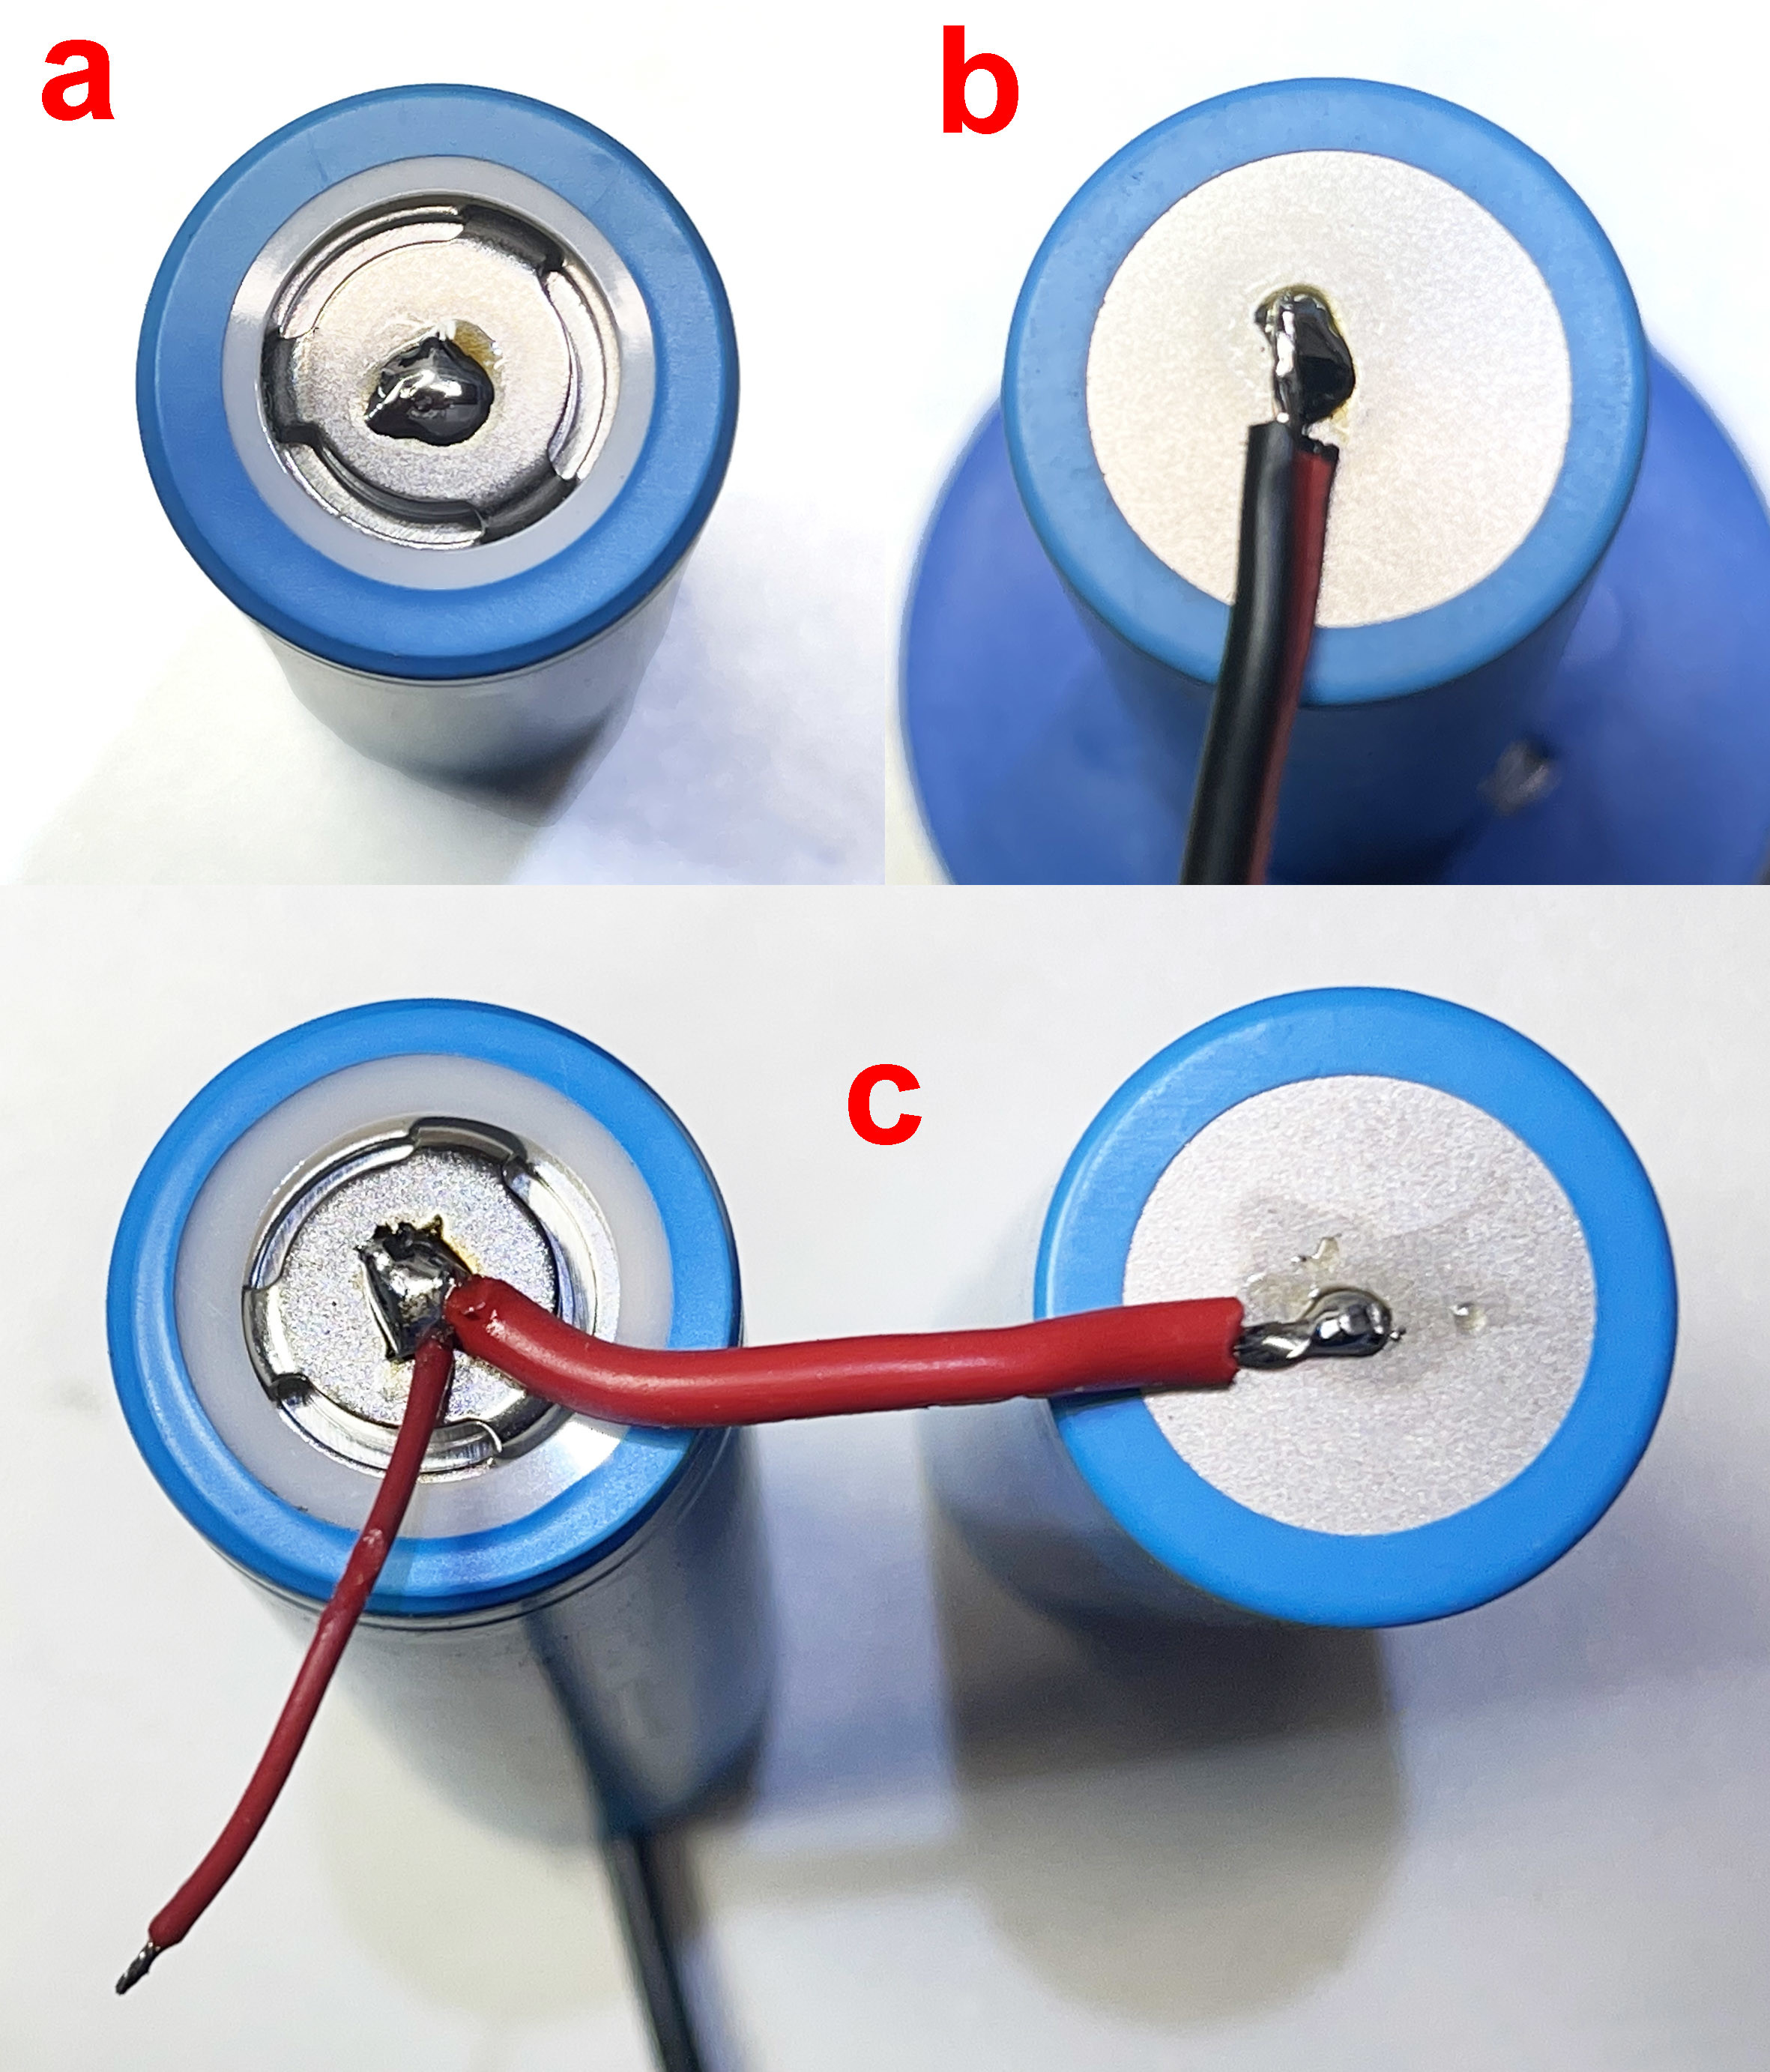 Battery contacts and solder